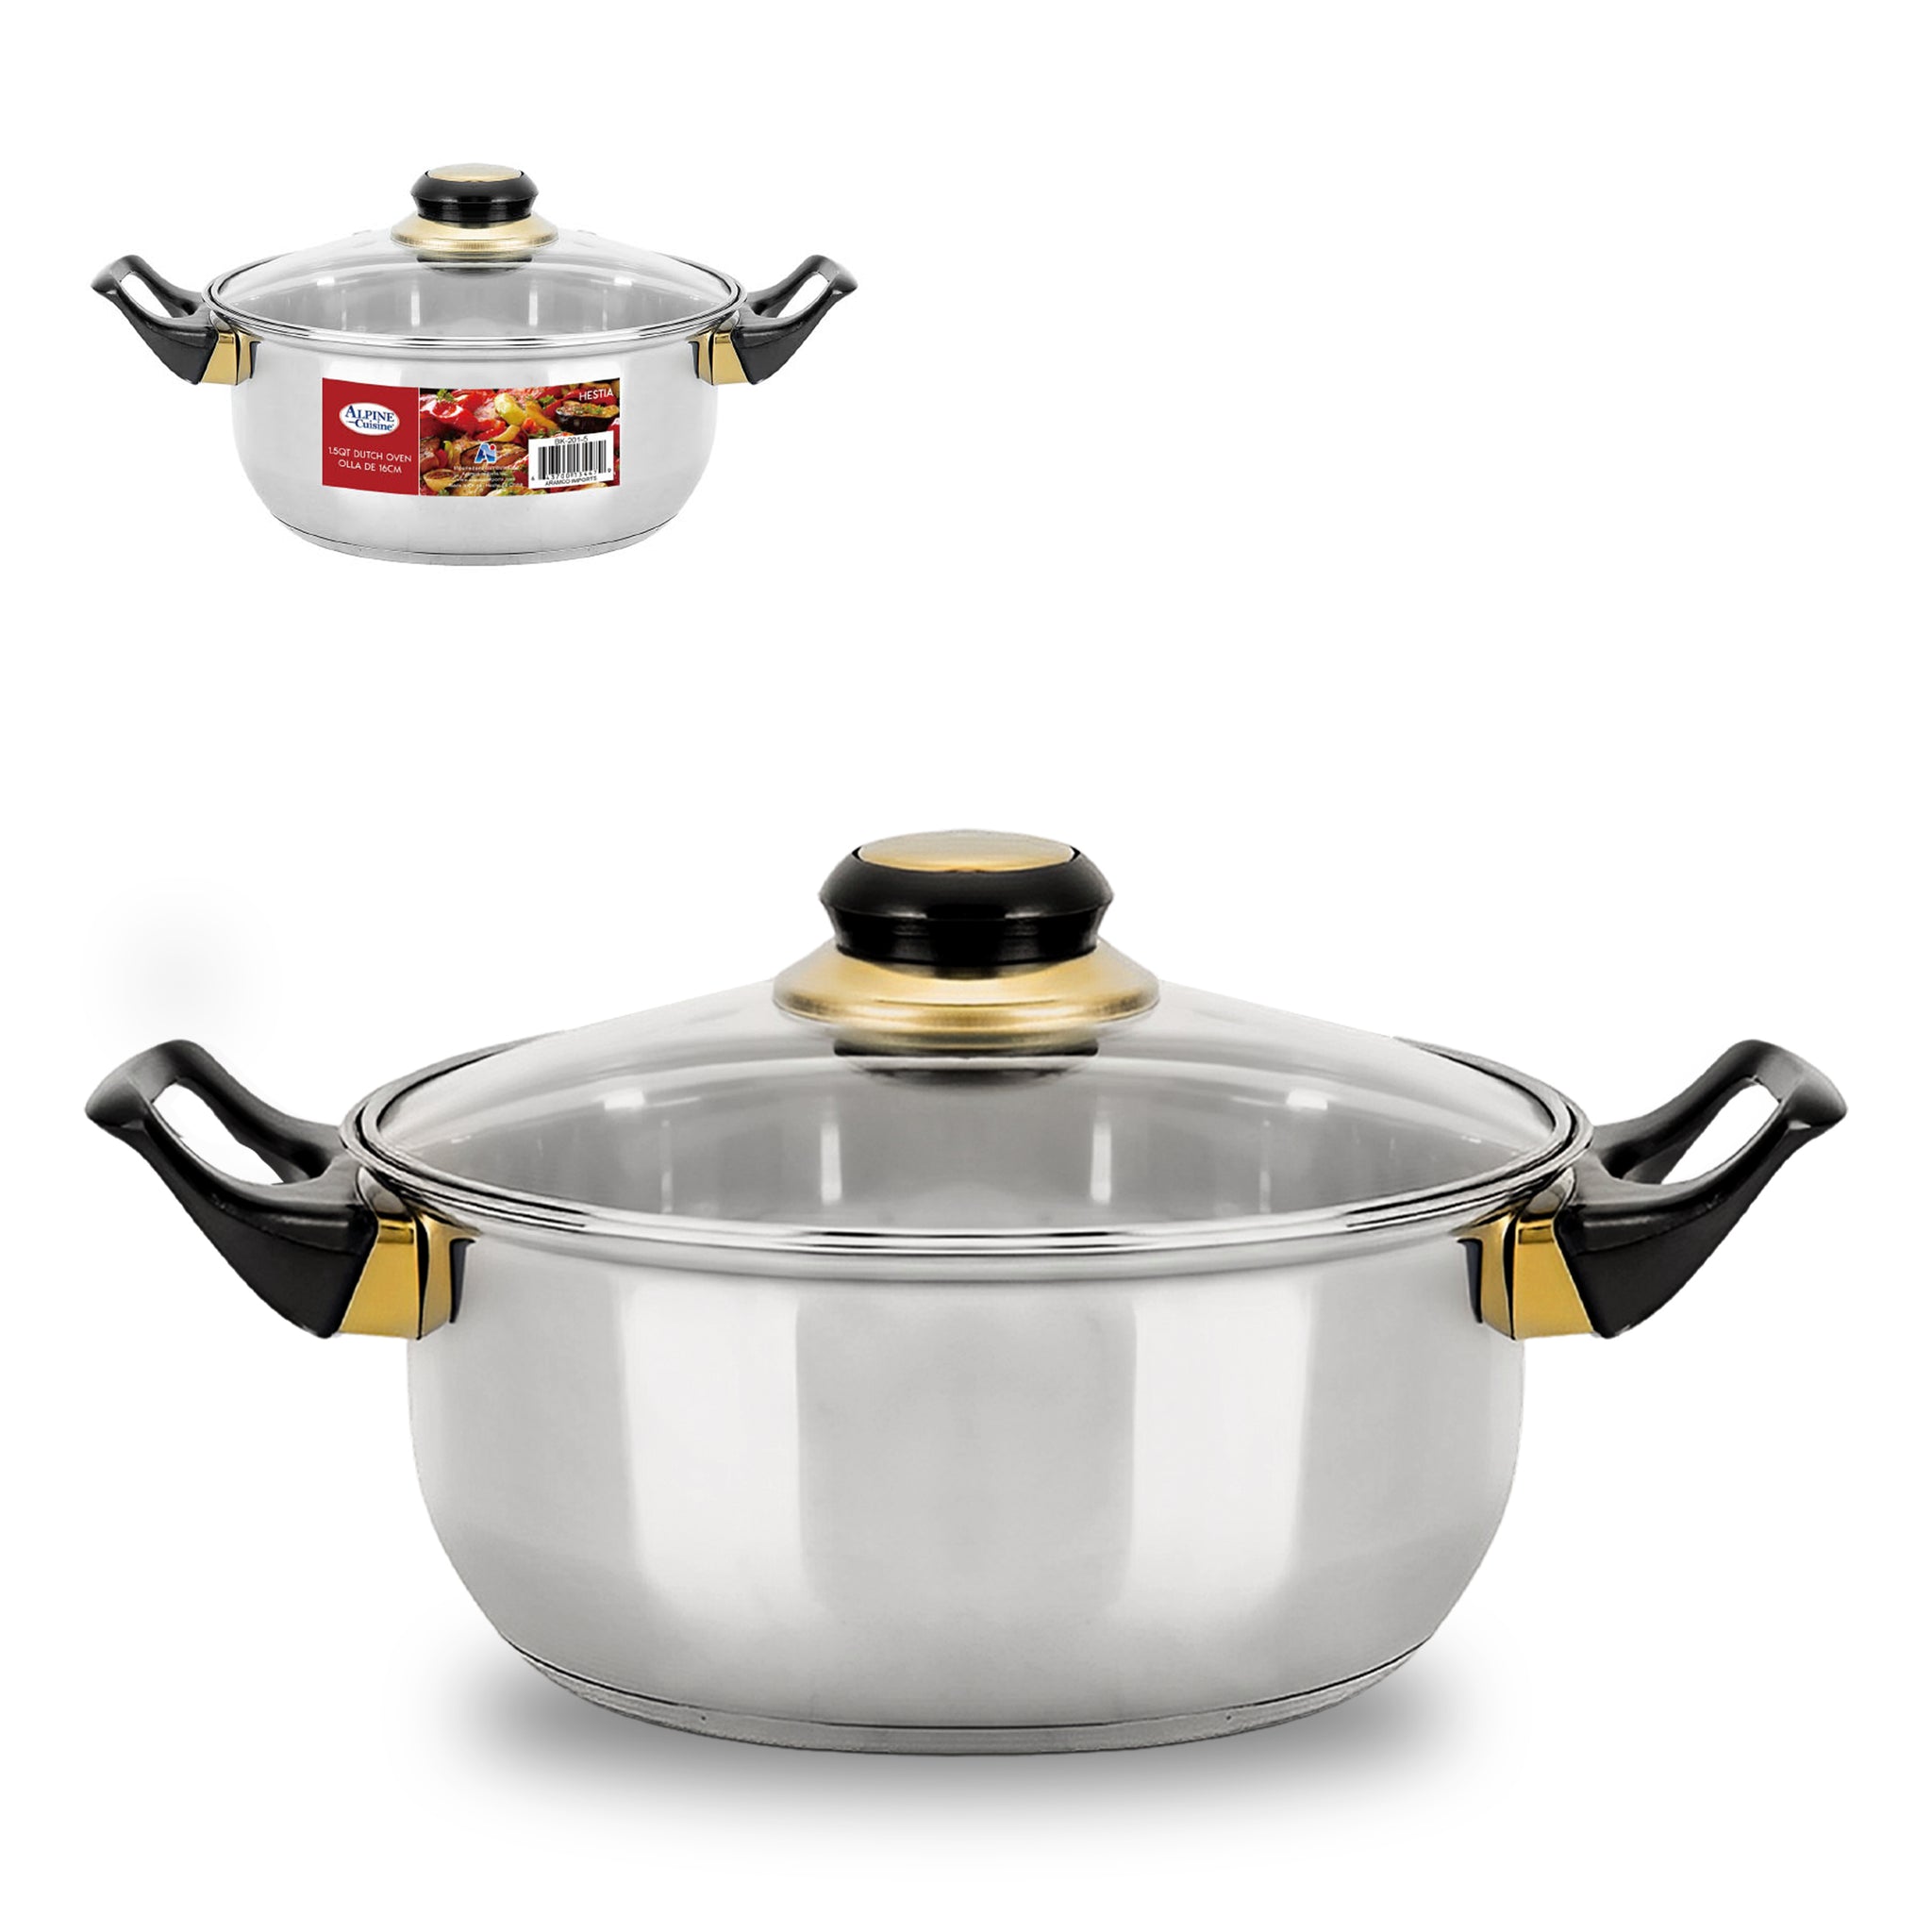 Alpine Cuisine Stainless Steel Dutch Oven 1.5 Qt with Tempered Glass Lid & Carrying Handles, Dutch Pot For Home kitchen Braising Boiling Stewing, Durable Rust Proof, Heat Distribution & Easy To Clean